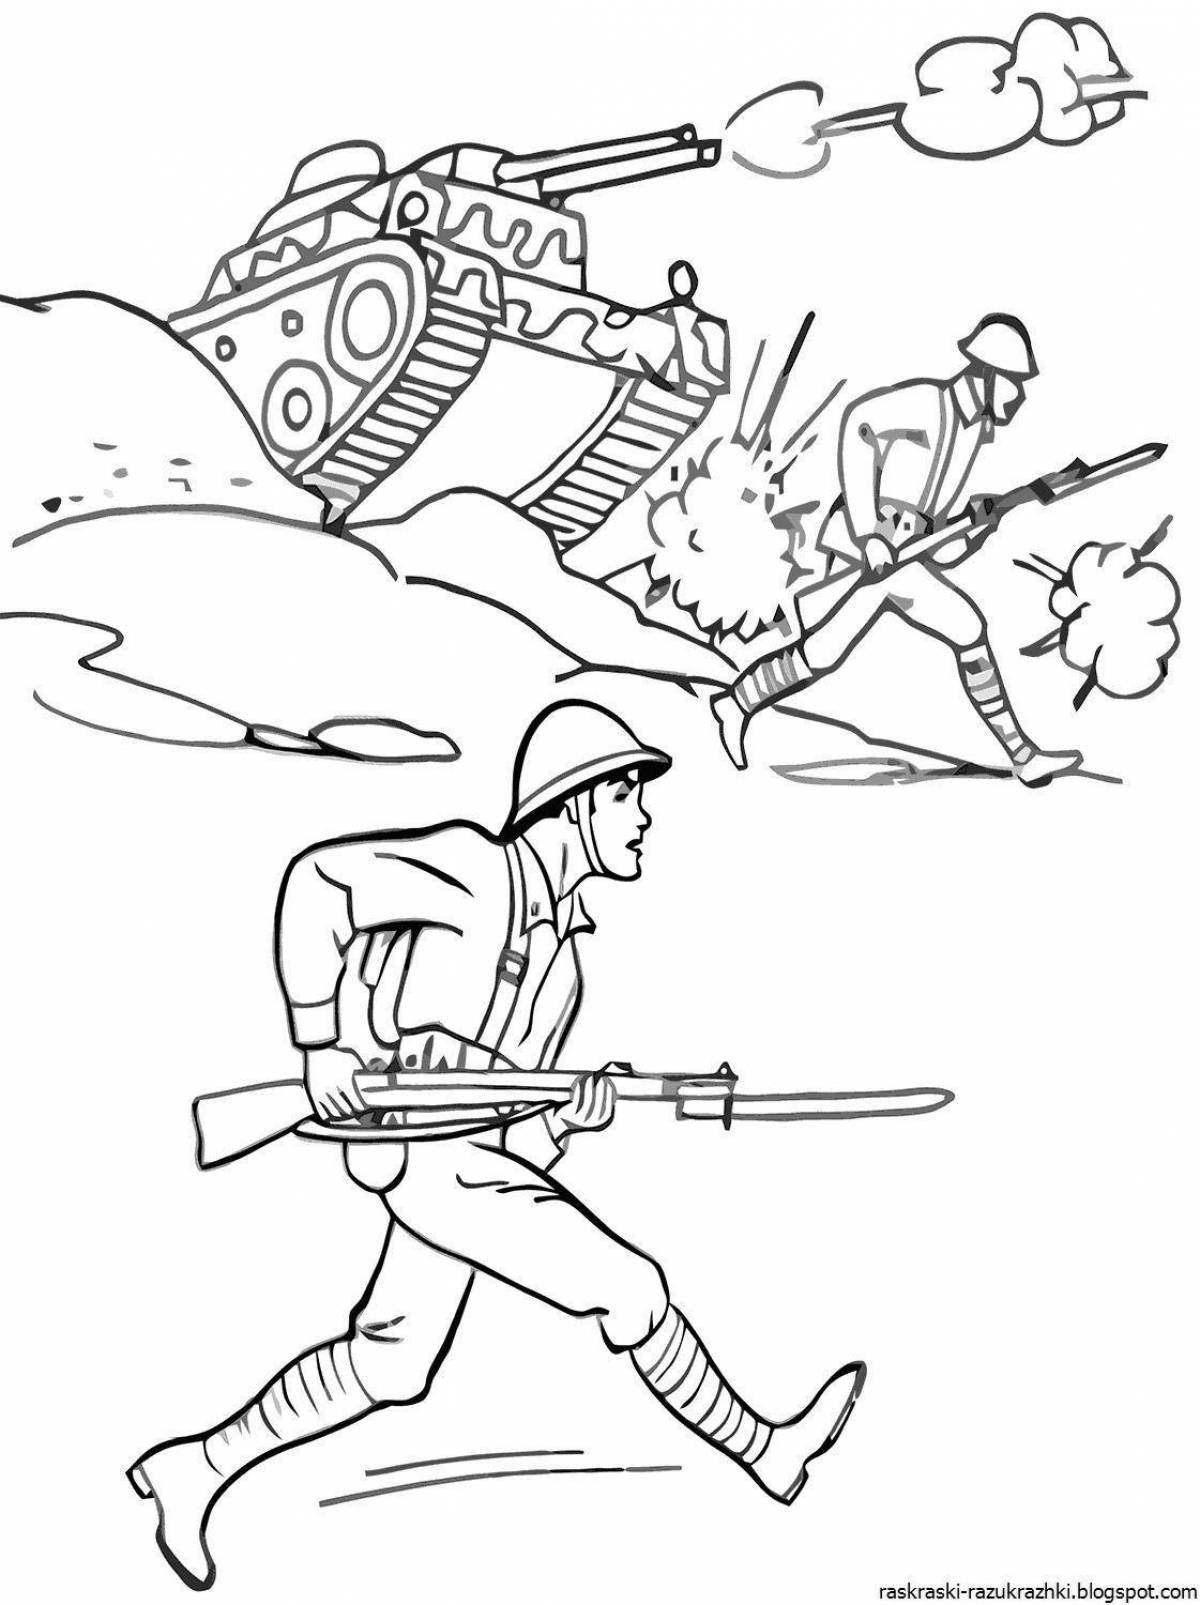 A fascinating coloring book for children, the war of 1941-1945